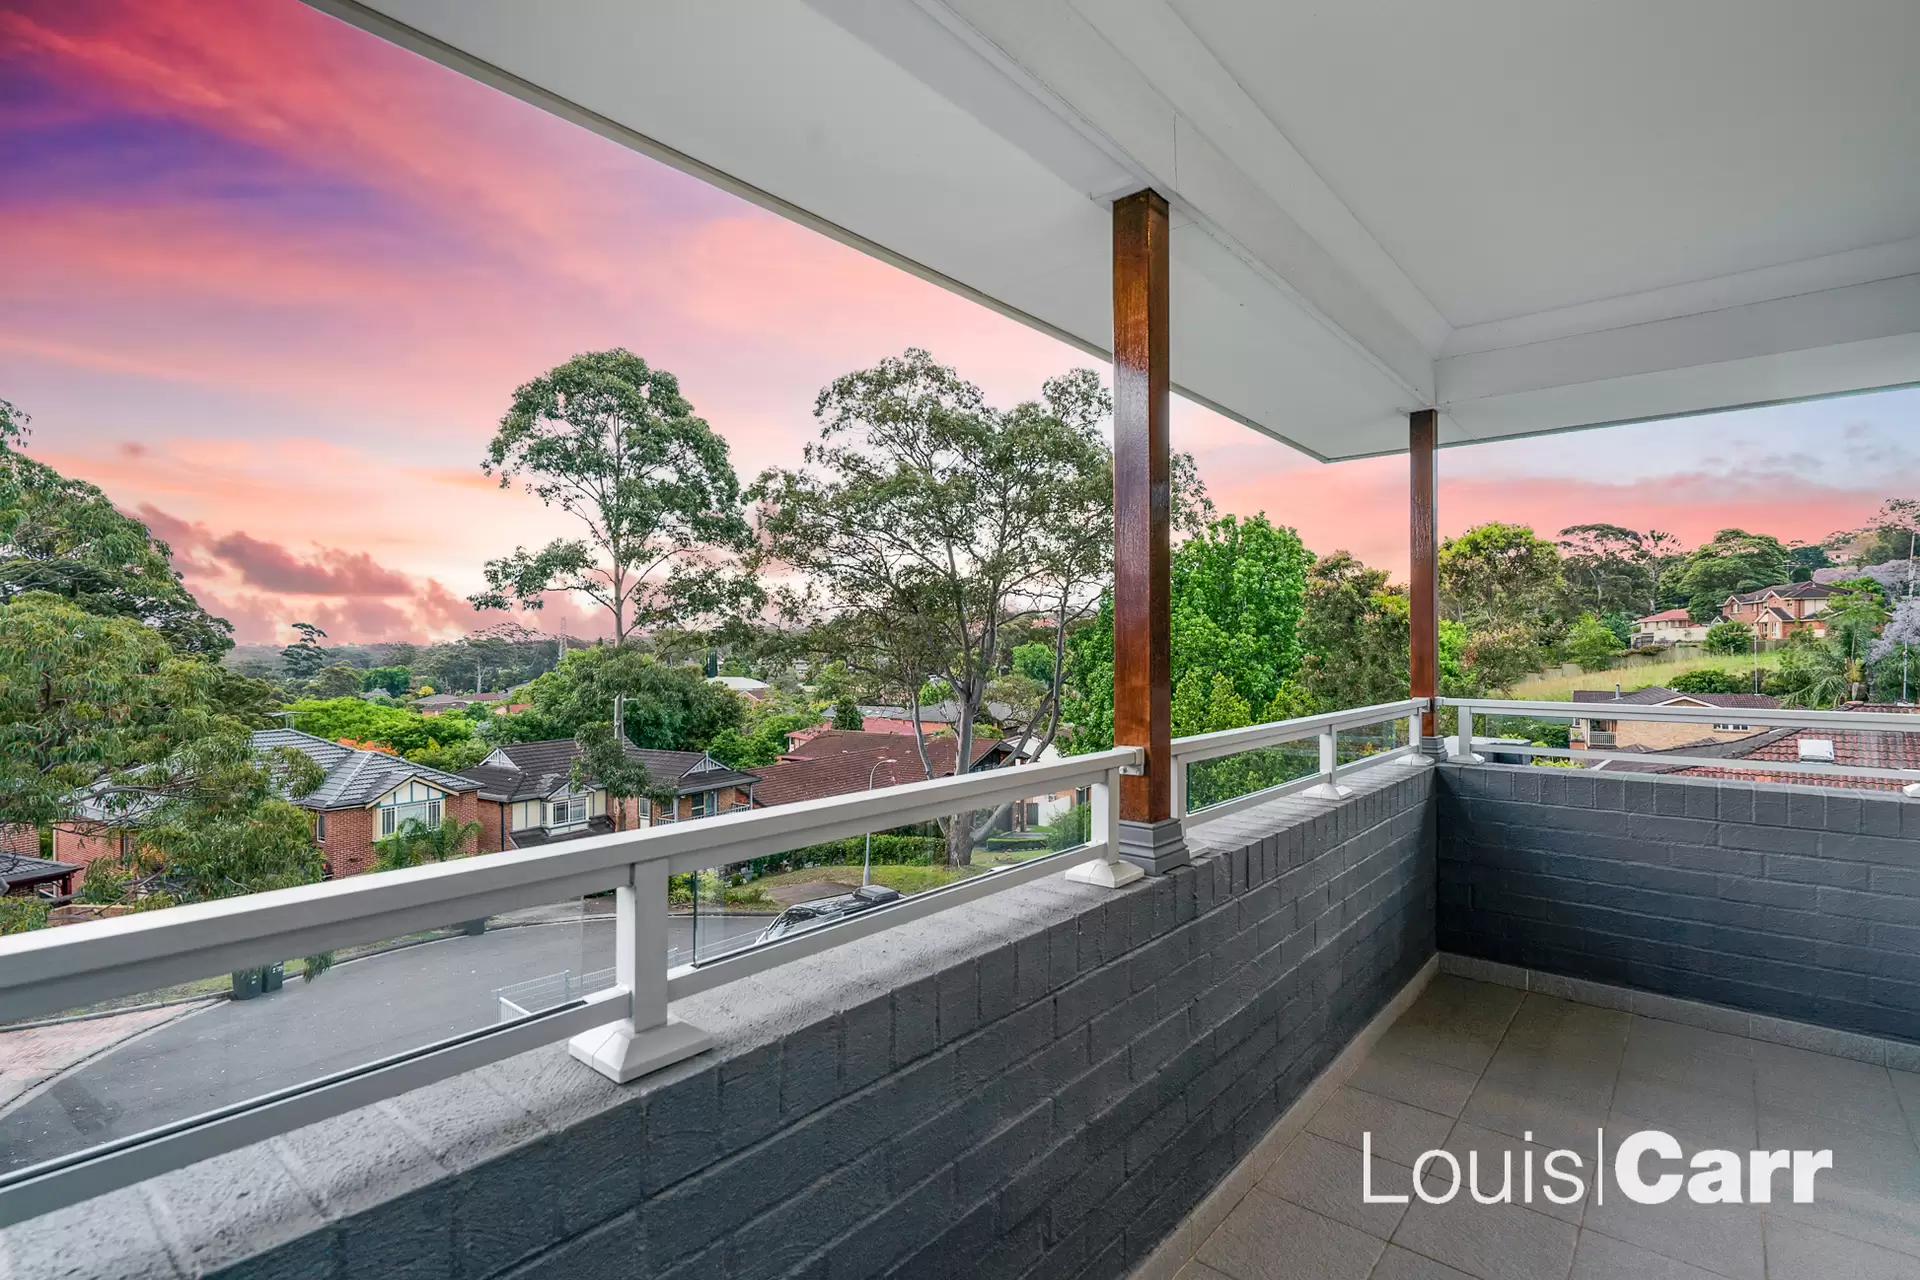 Photo #9: 27 Glenvale Close, West Pennant Hills - For Sale by Louis Carr Real Estate